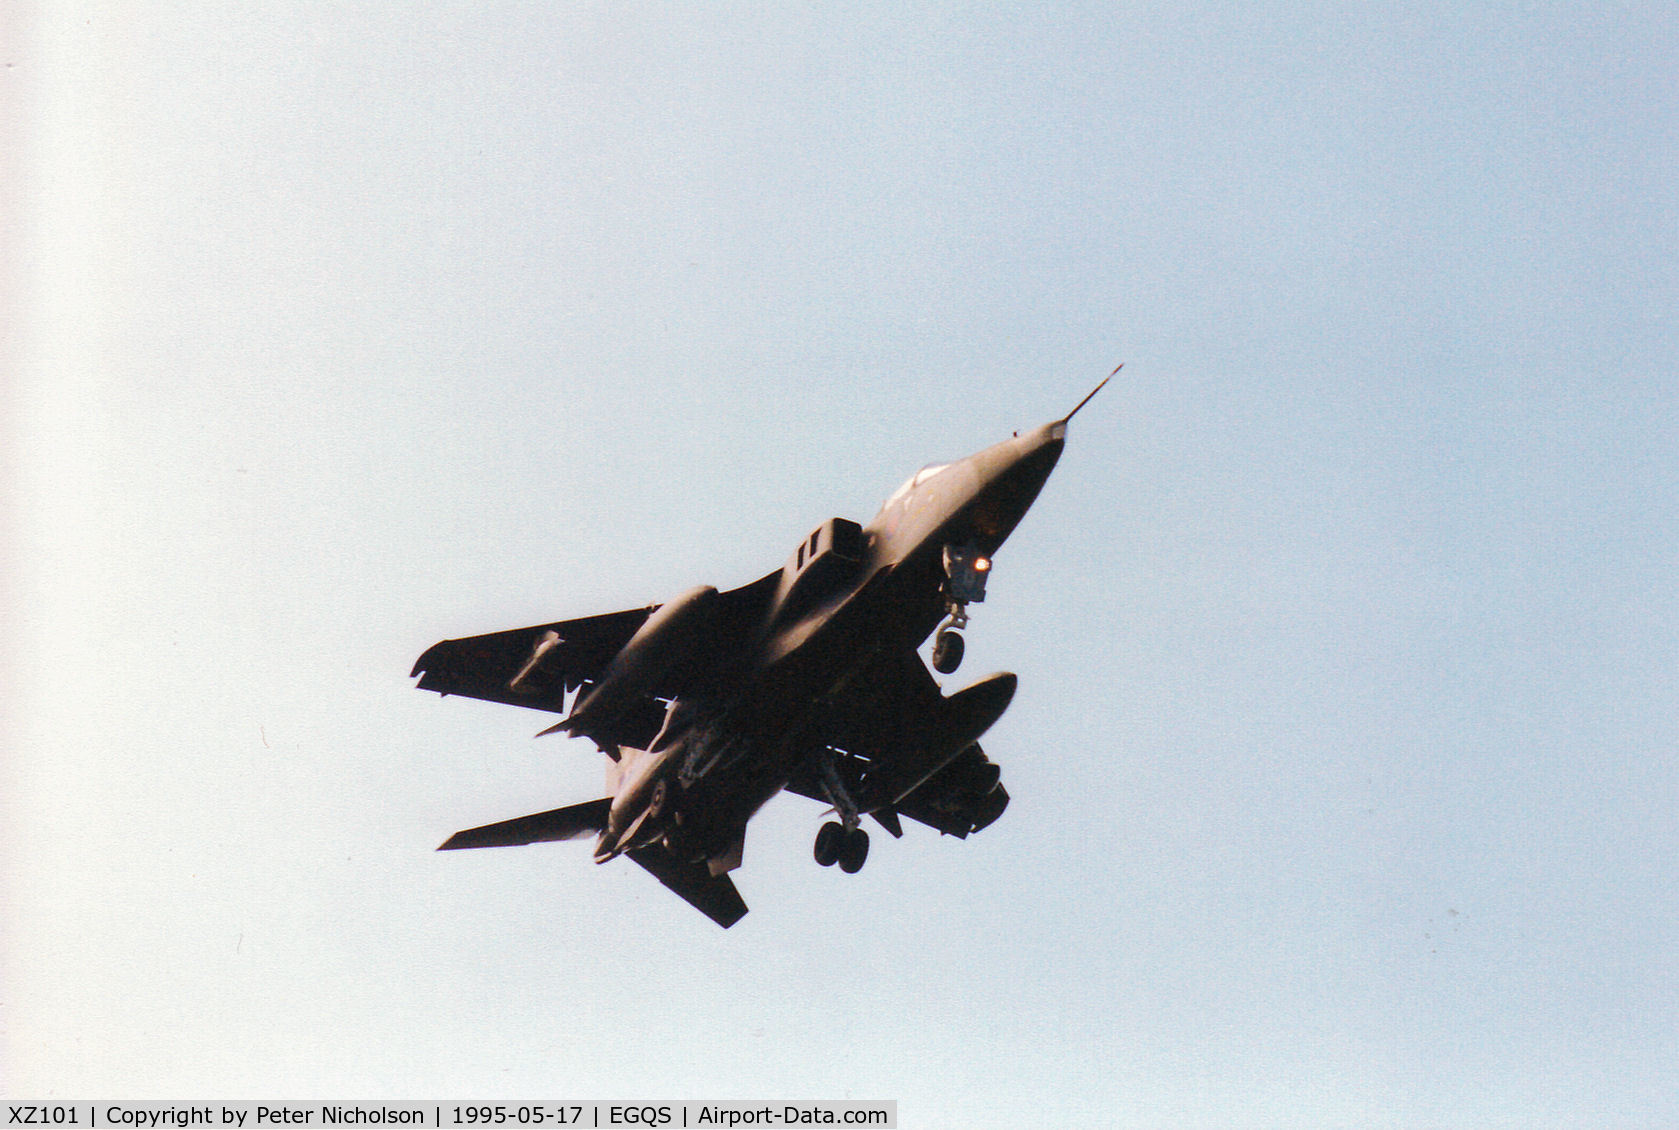 XZ101, 1976 Sepecat Jaguar GR.1A C/N S.102, Jaguar GR.1A of 16[Reserve] Squadron on approach to Runway 05 at RAF Lossiemouth in the Summer of 1995.